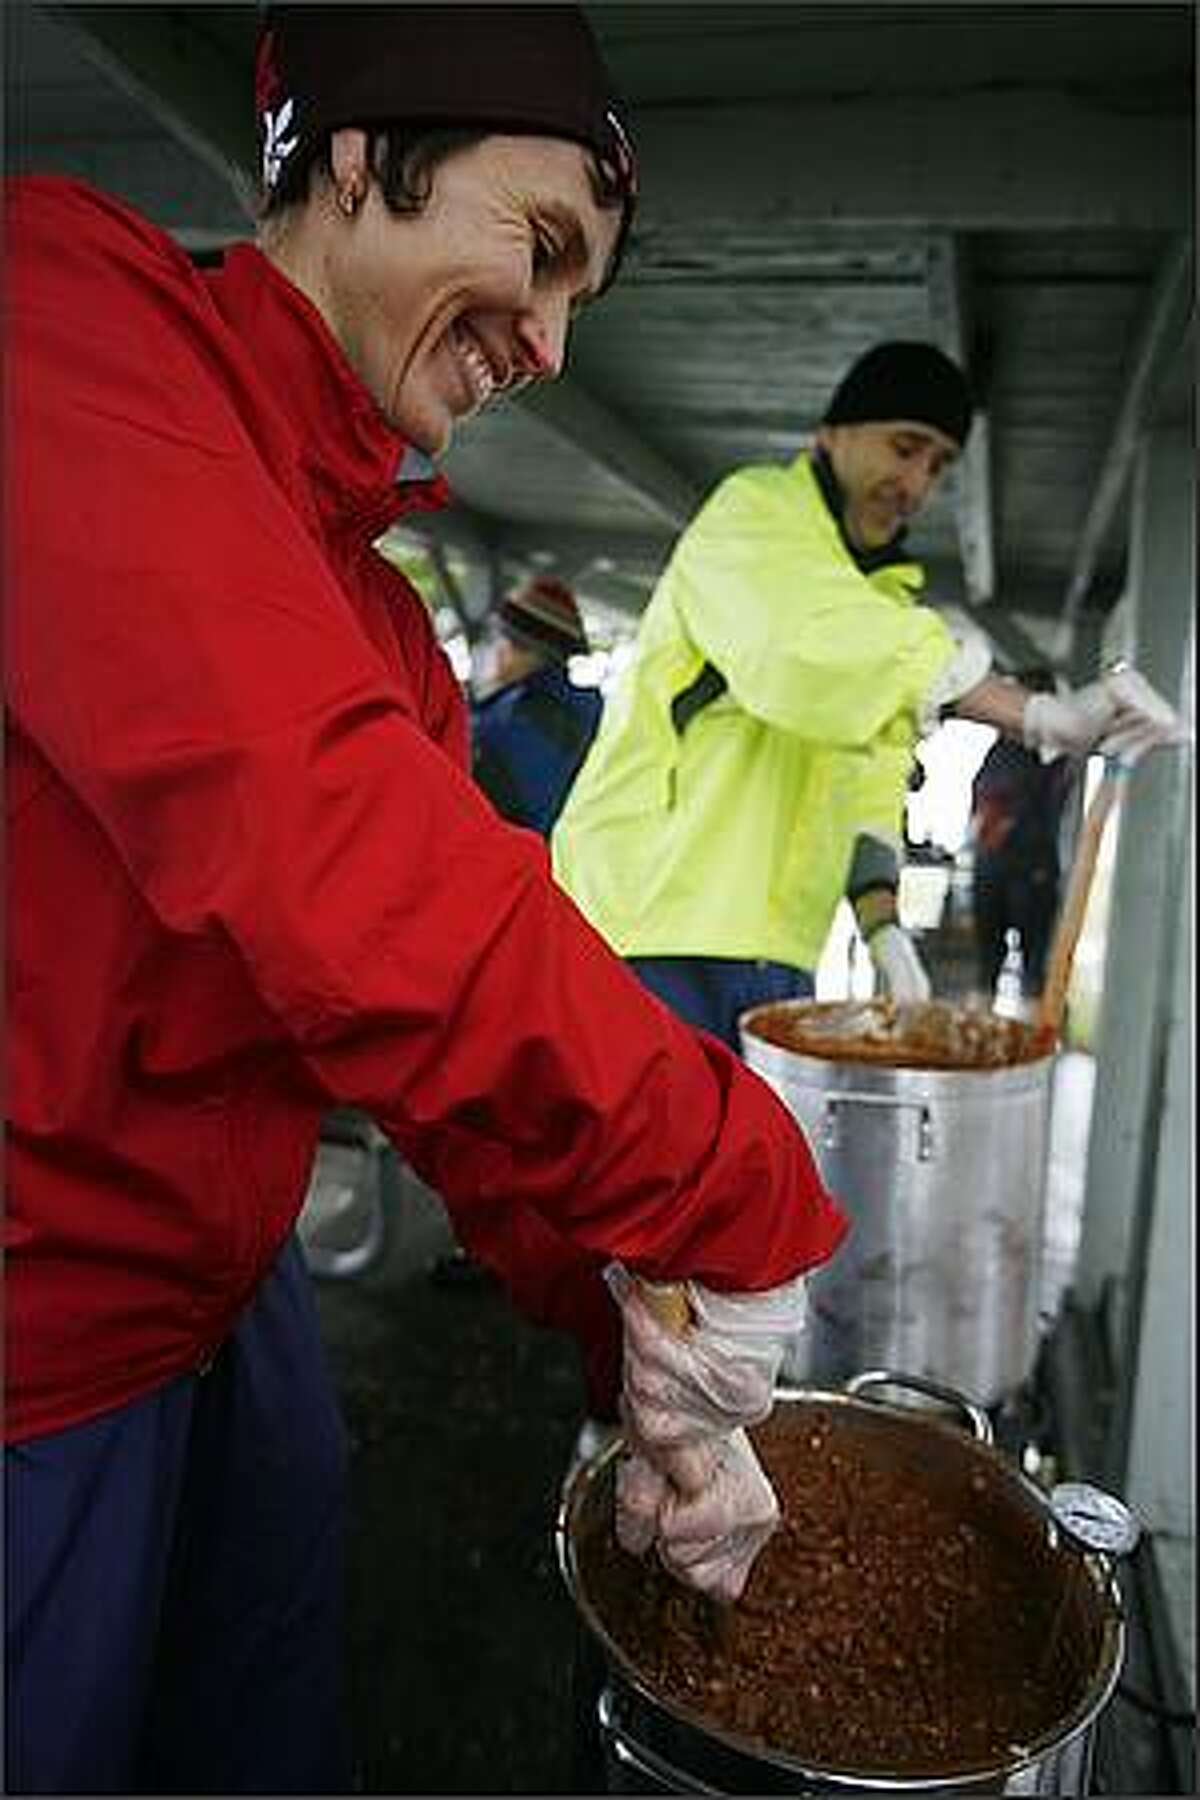 Timea Tihanyi and her husband Sandor Kovacs stir large pots of warm chili on hand for chilly runners participating in the Resolution Run 5K and Polar Bear Dive at Magnuson Park on New Year's Day.